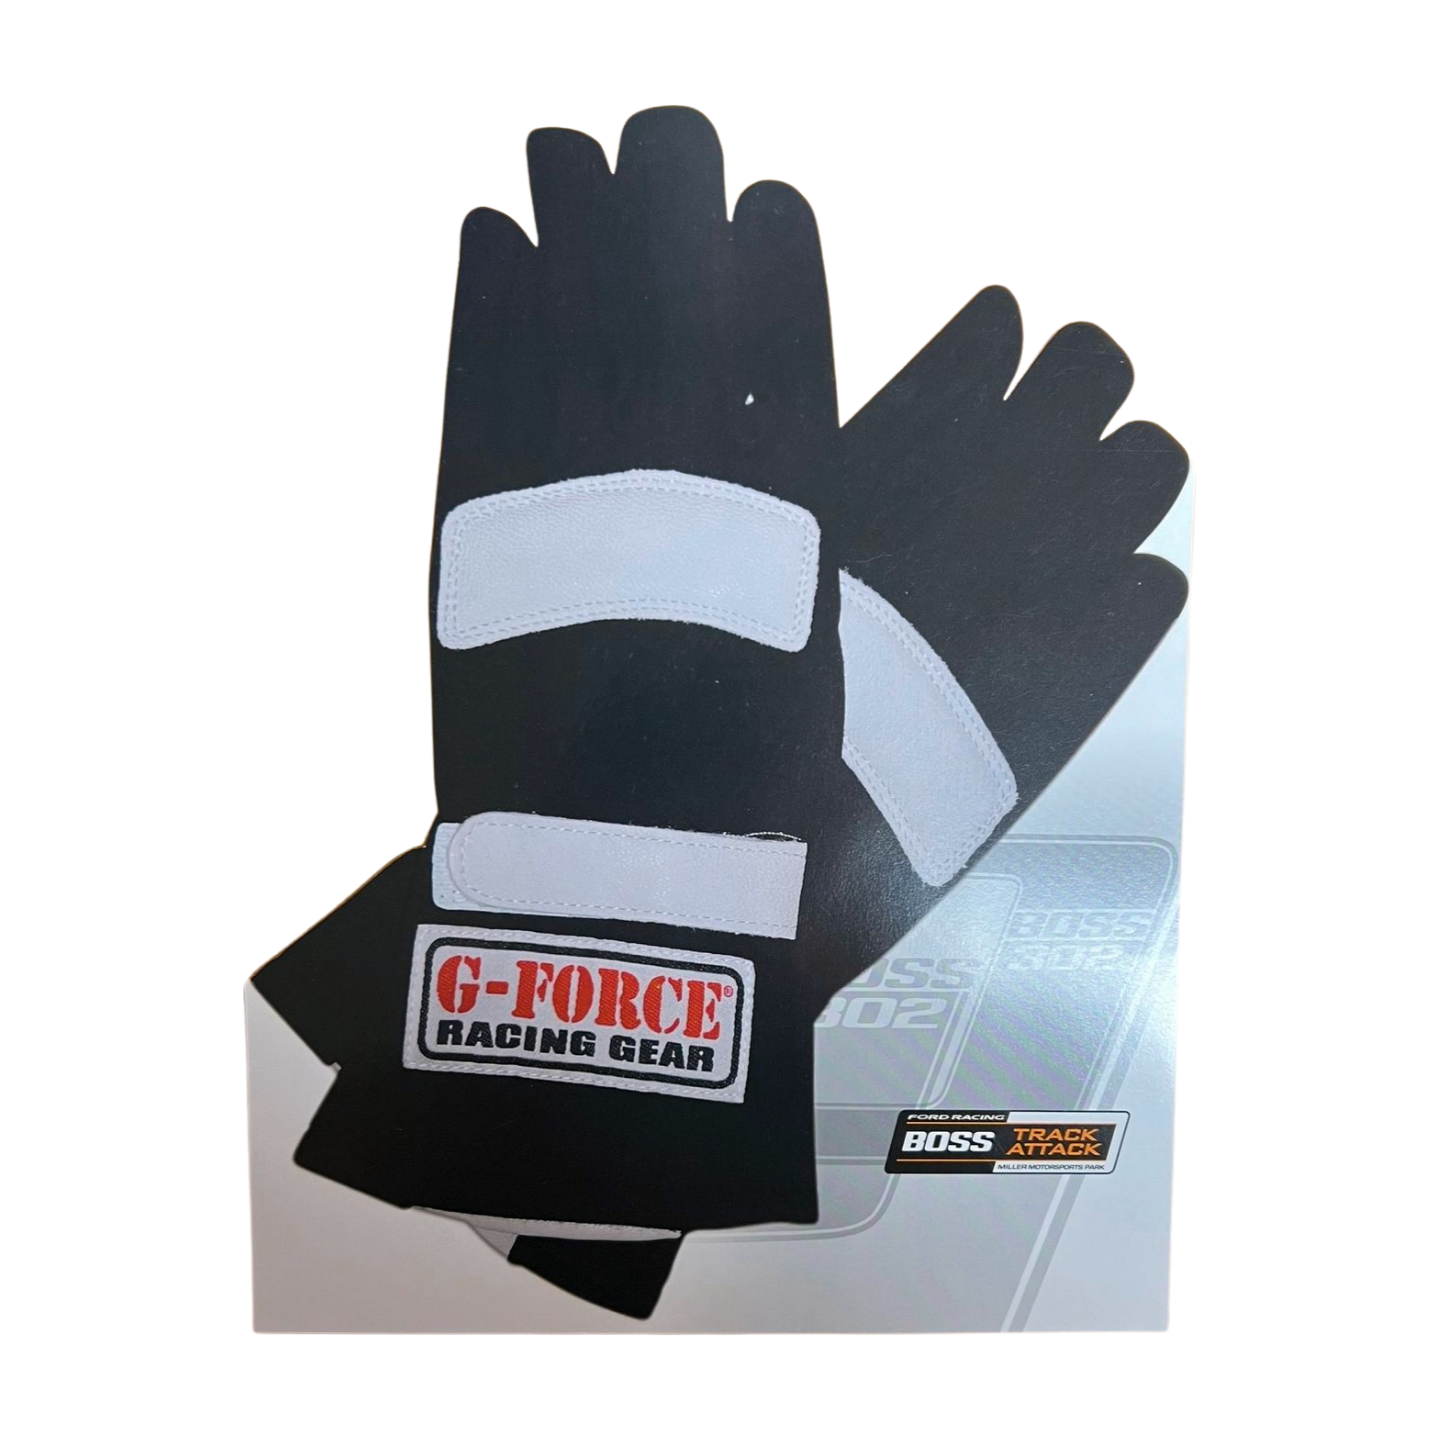 G-FORCE Racing Gear Gloves